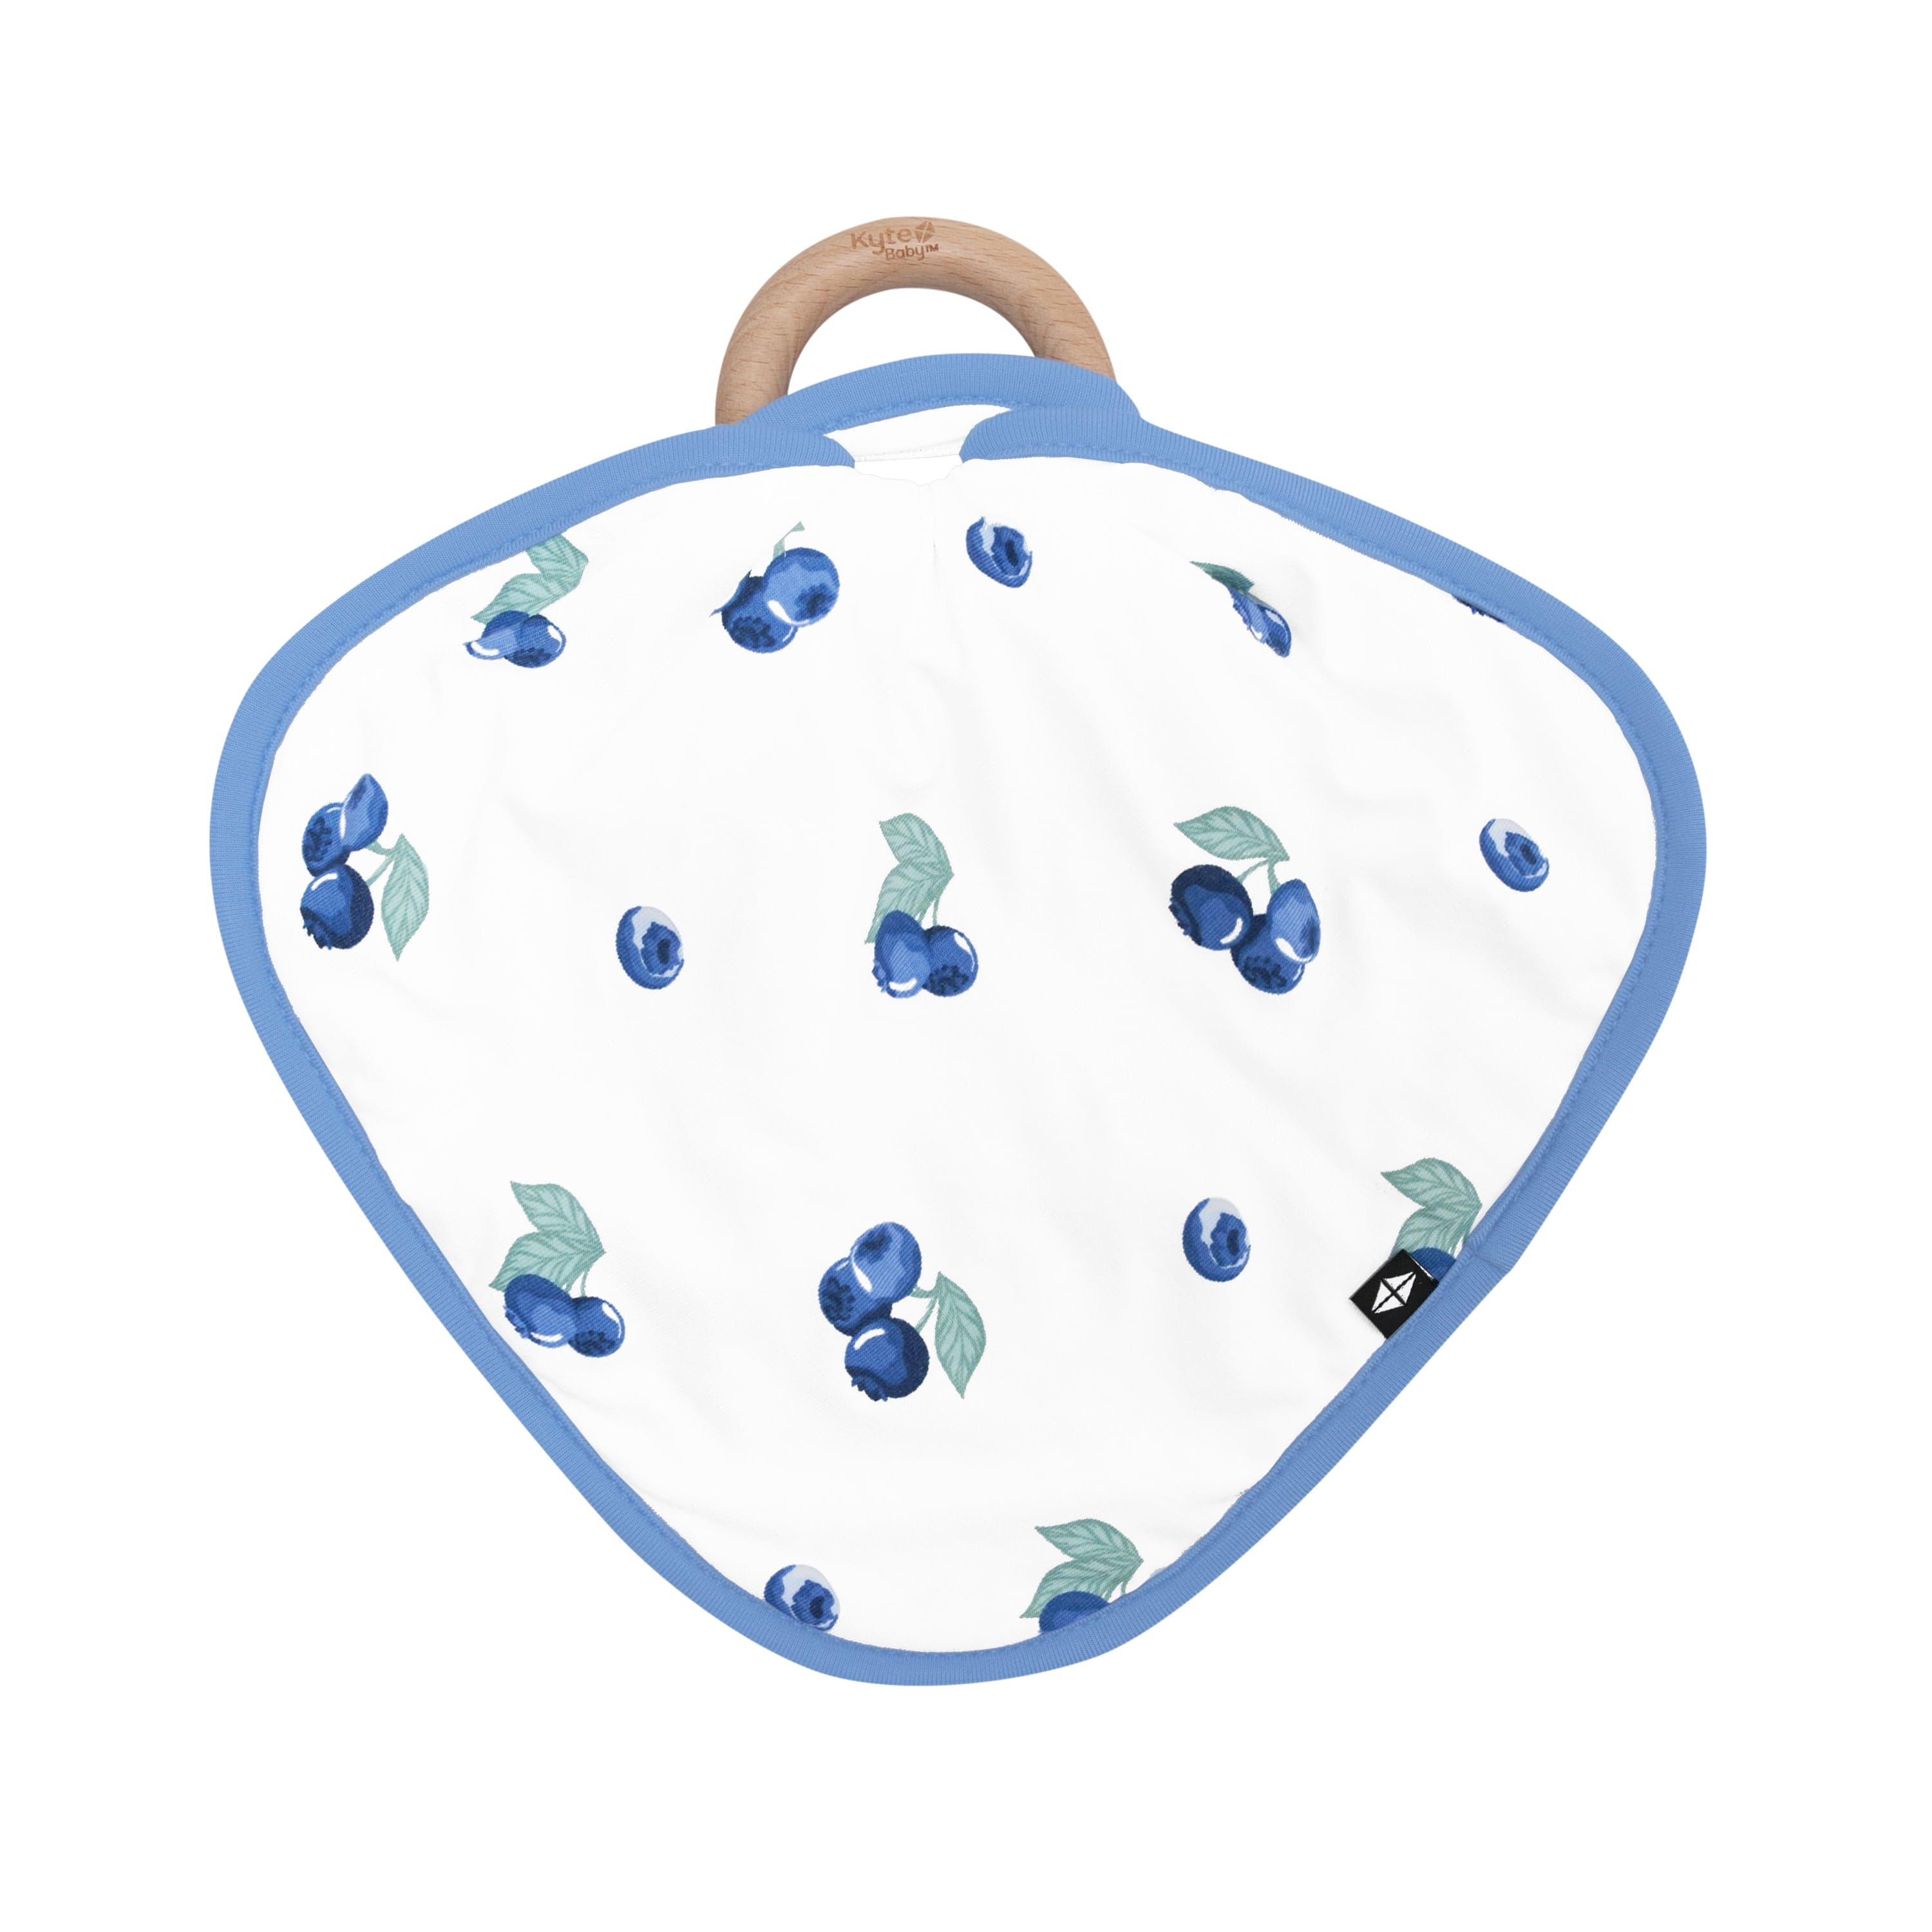 Kyte Baby Lovey Blueberry / Infant Lovey in Blueberry with Removable Teething Ring